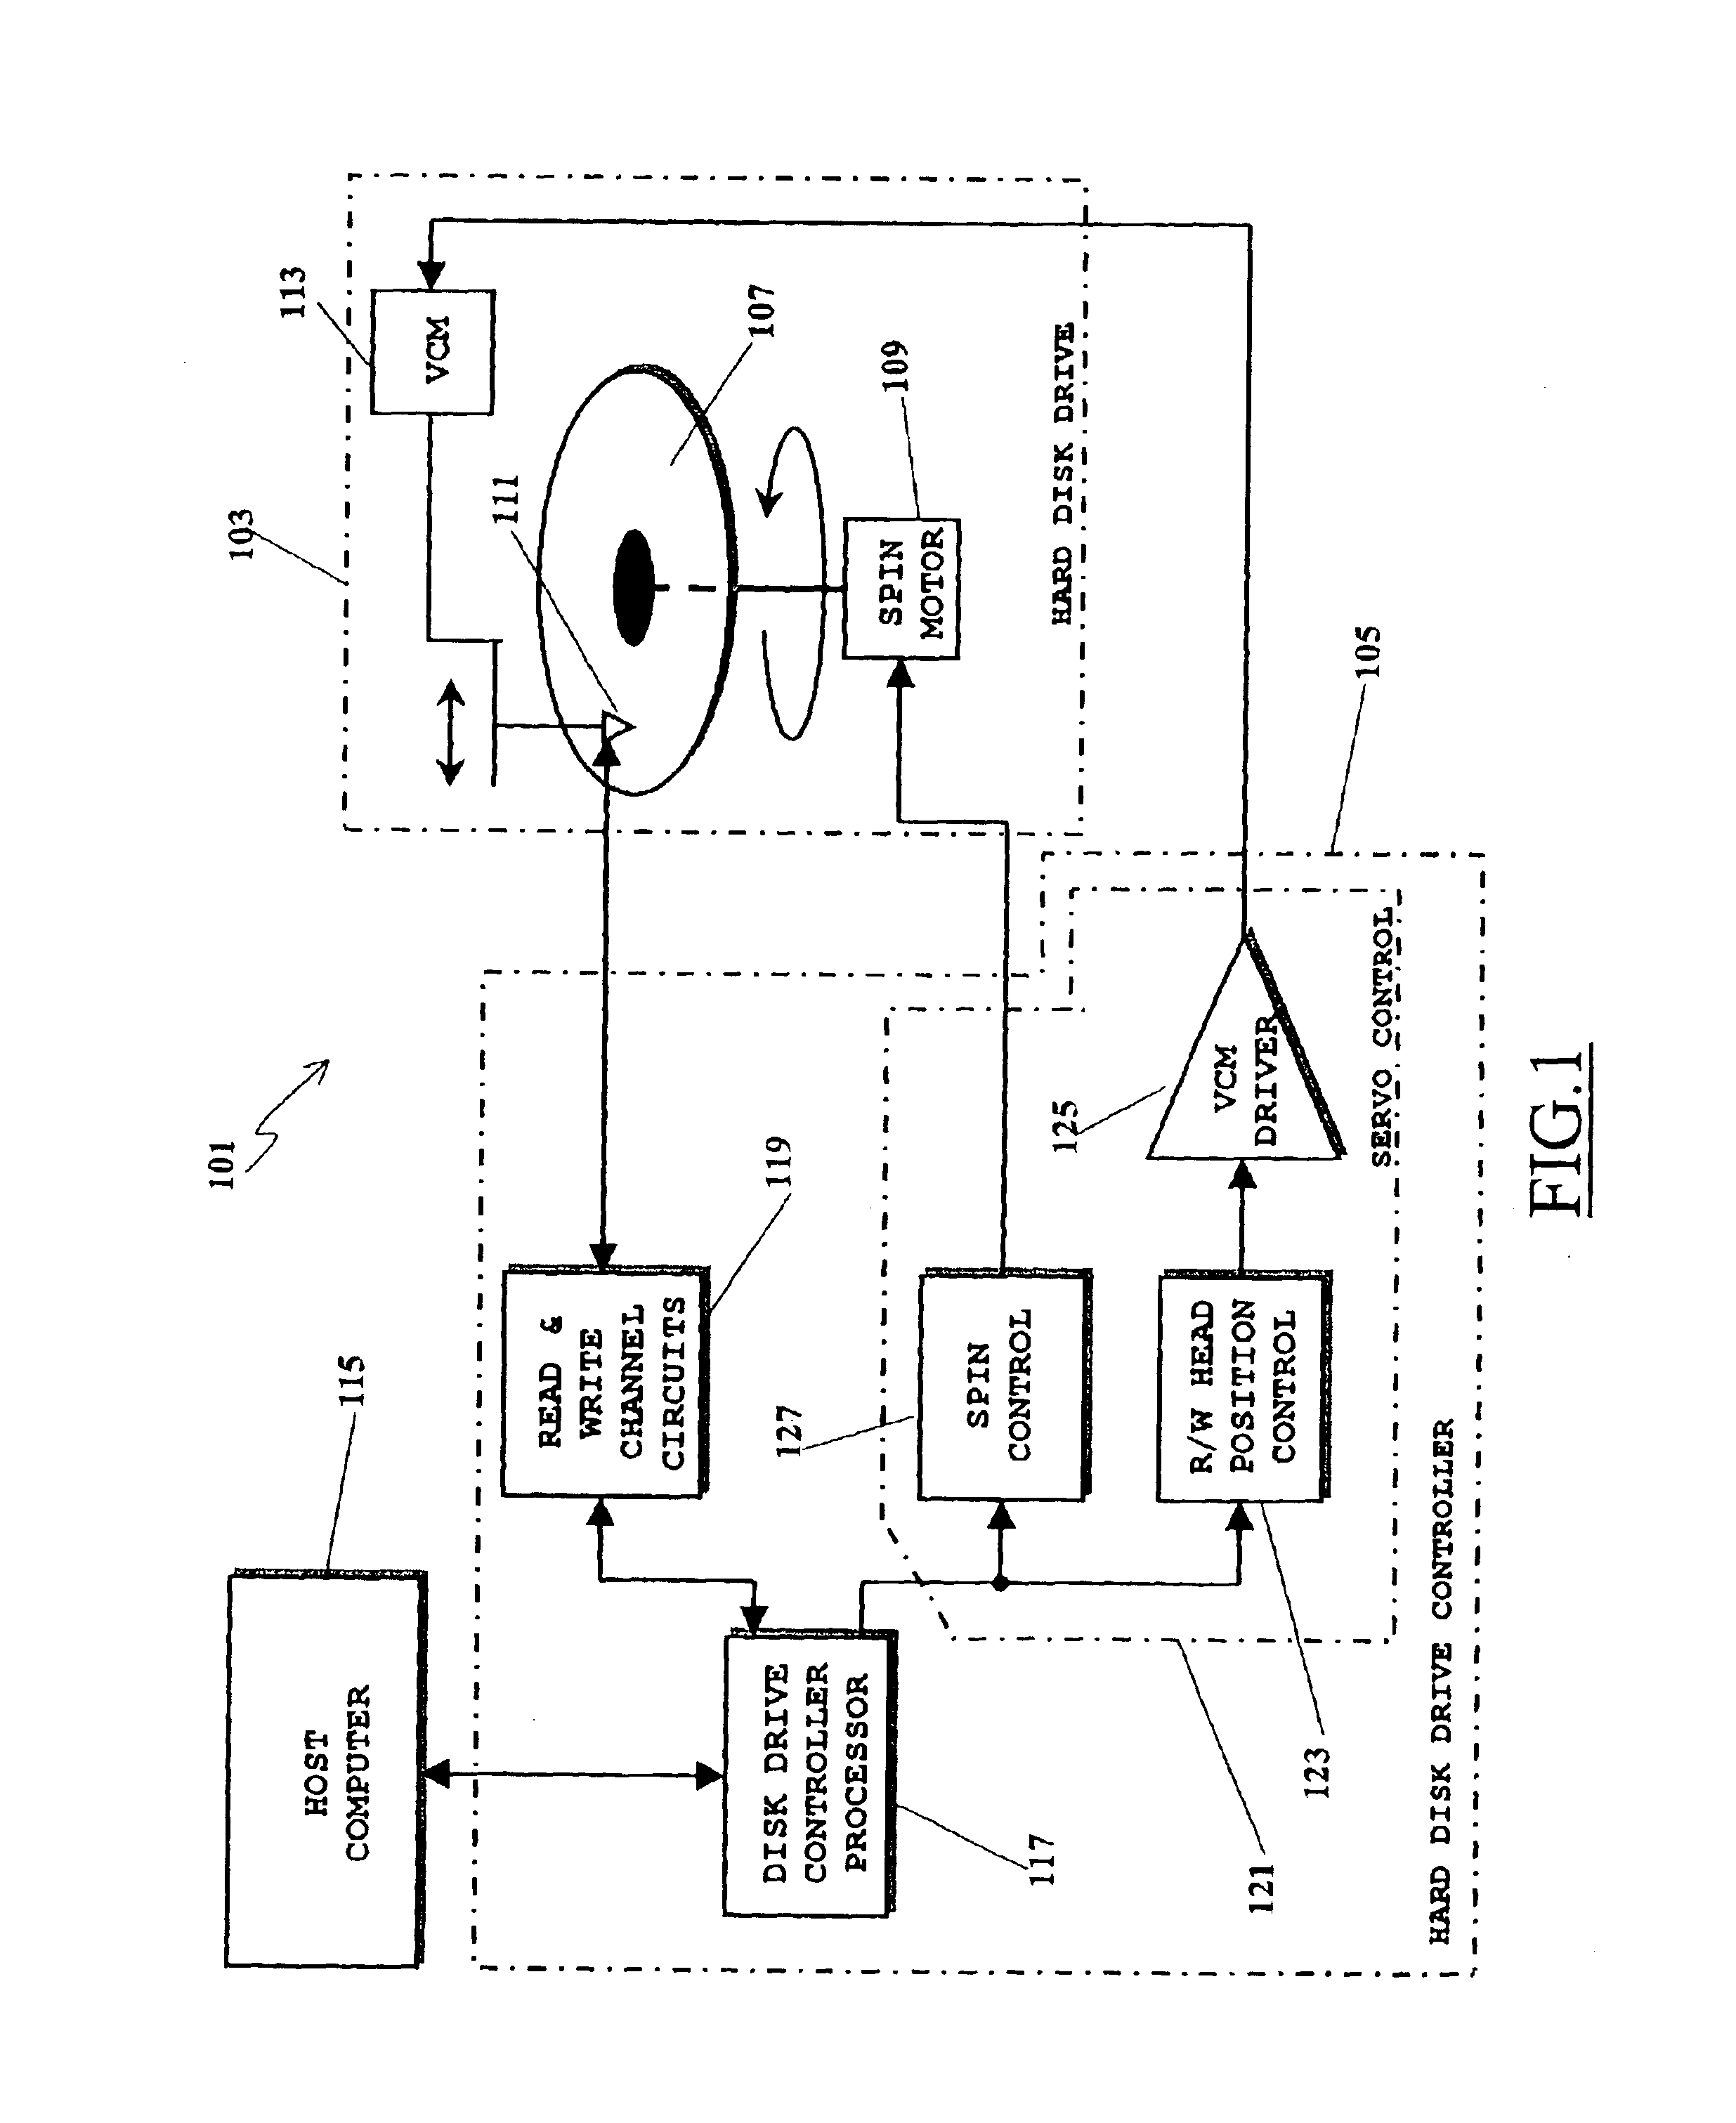 Voltage-mode drive for driving complex impedance loads